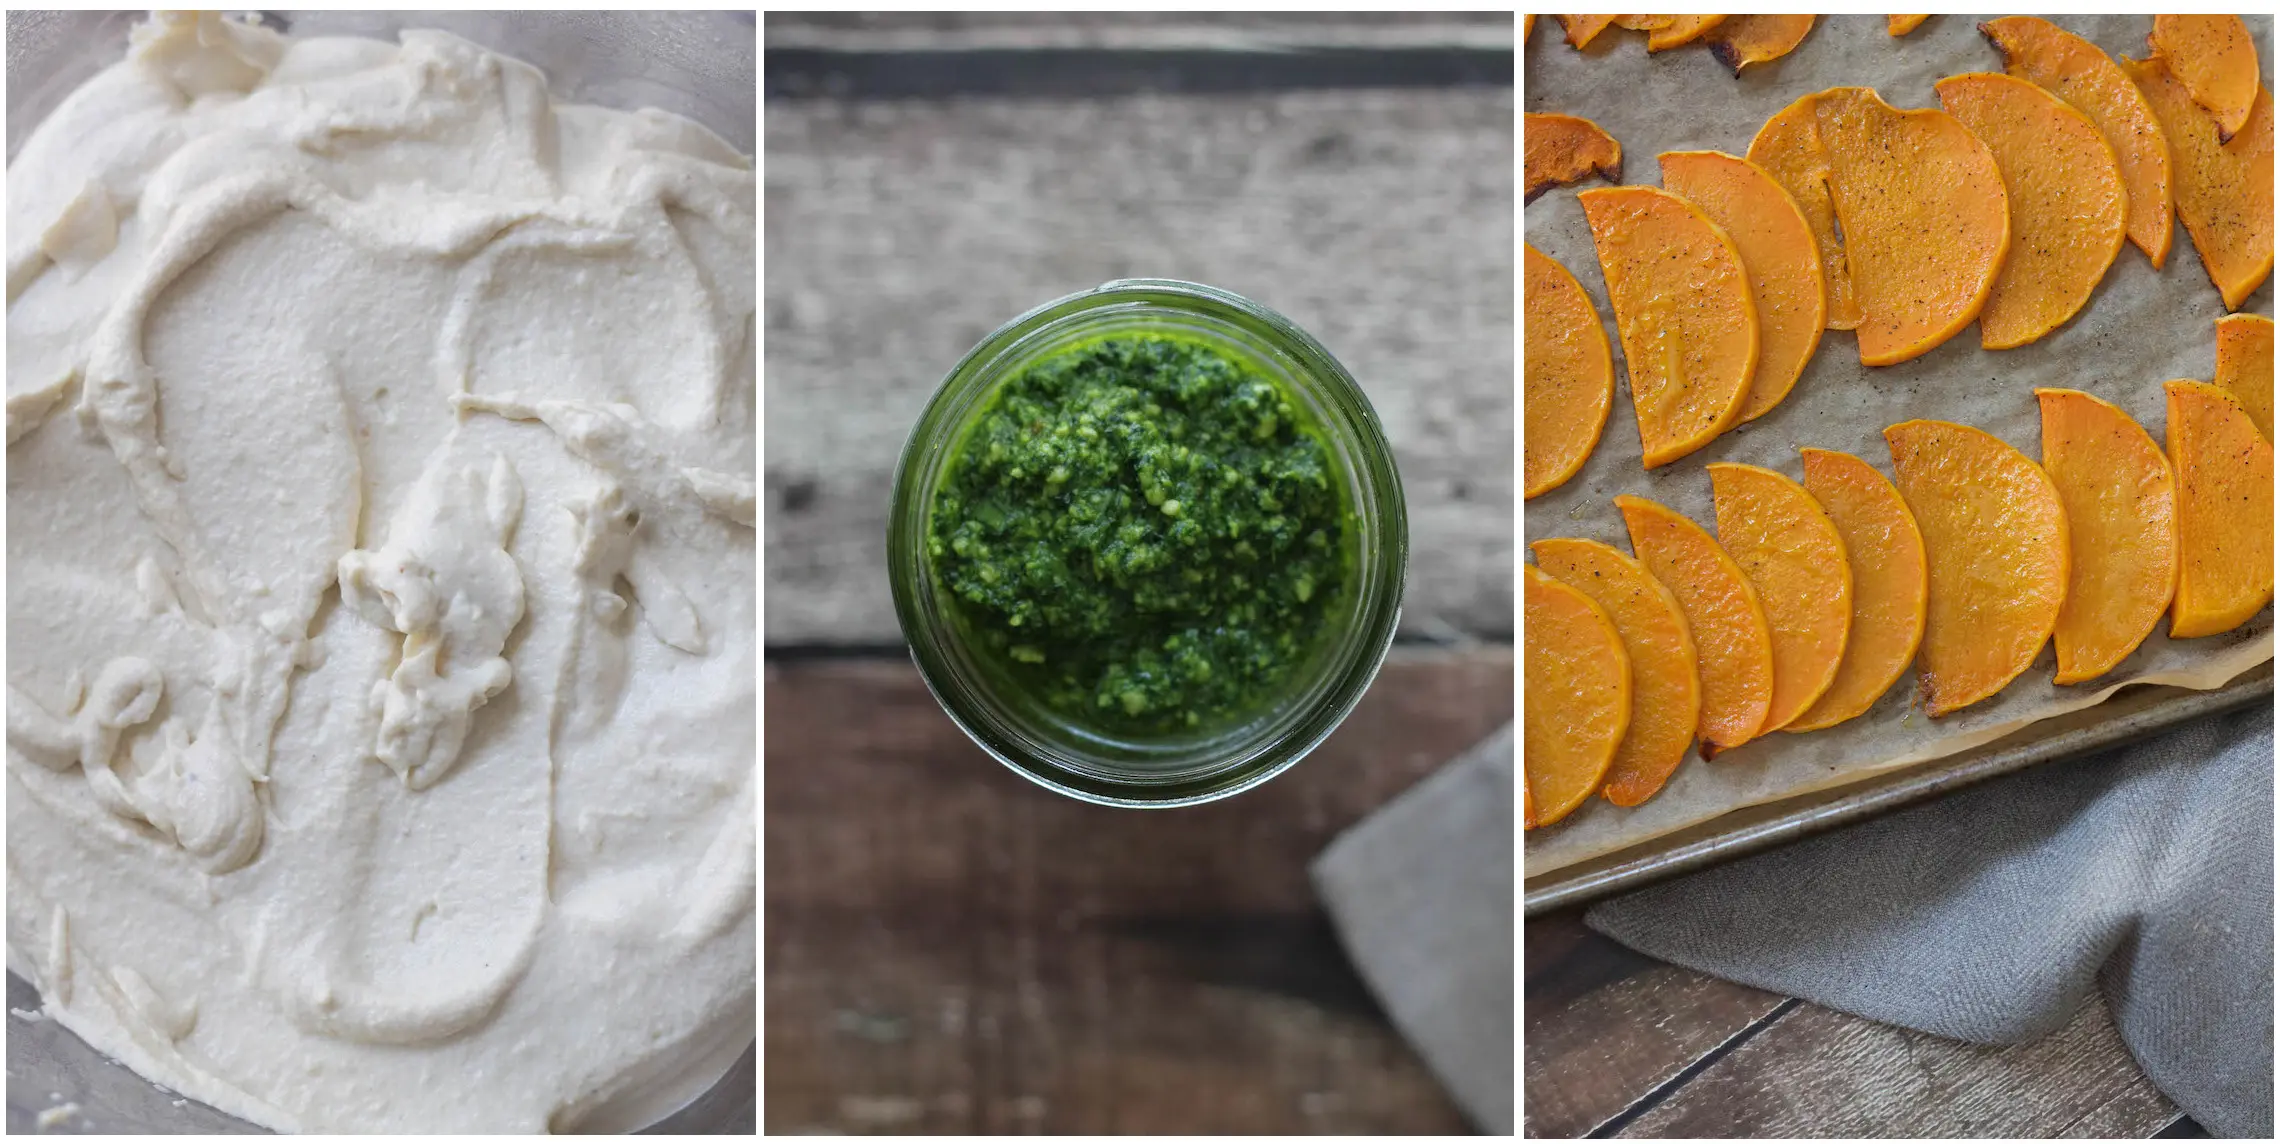 Pic 1: Close up of the white dairy-free cheese sauce
Pic 2: View from above of the but-free pesto in a glass jar with no lid.
Pic 3: Half moons of butternut squash on a baking sheet having just been roasted.